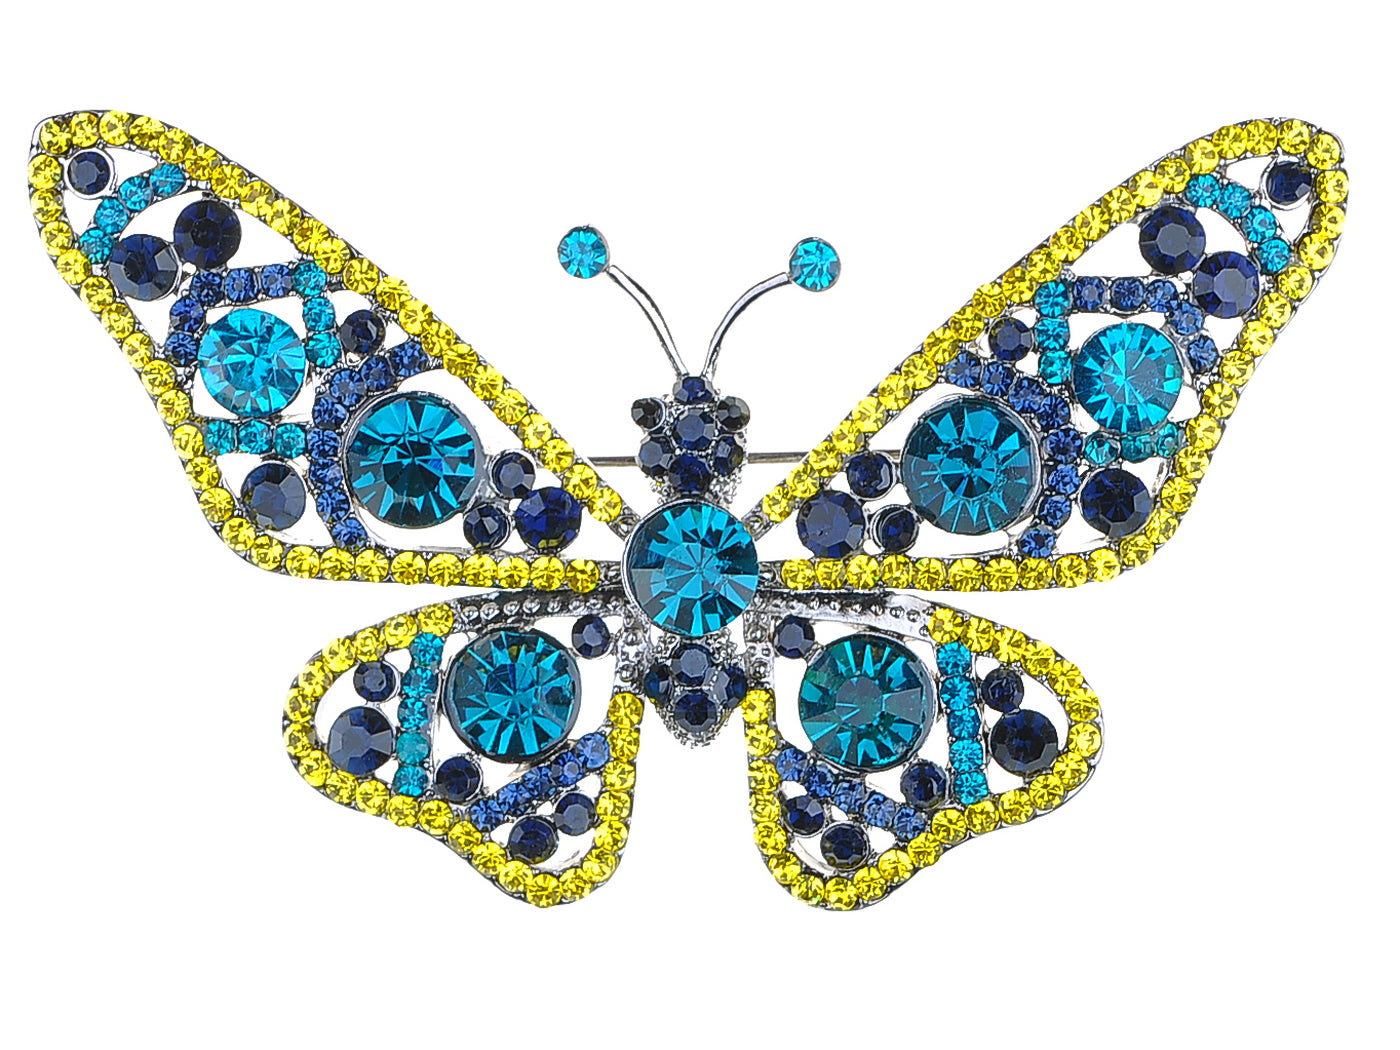 Blue Topaz Butterfly Insect Brooch Pin